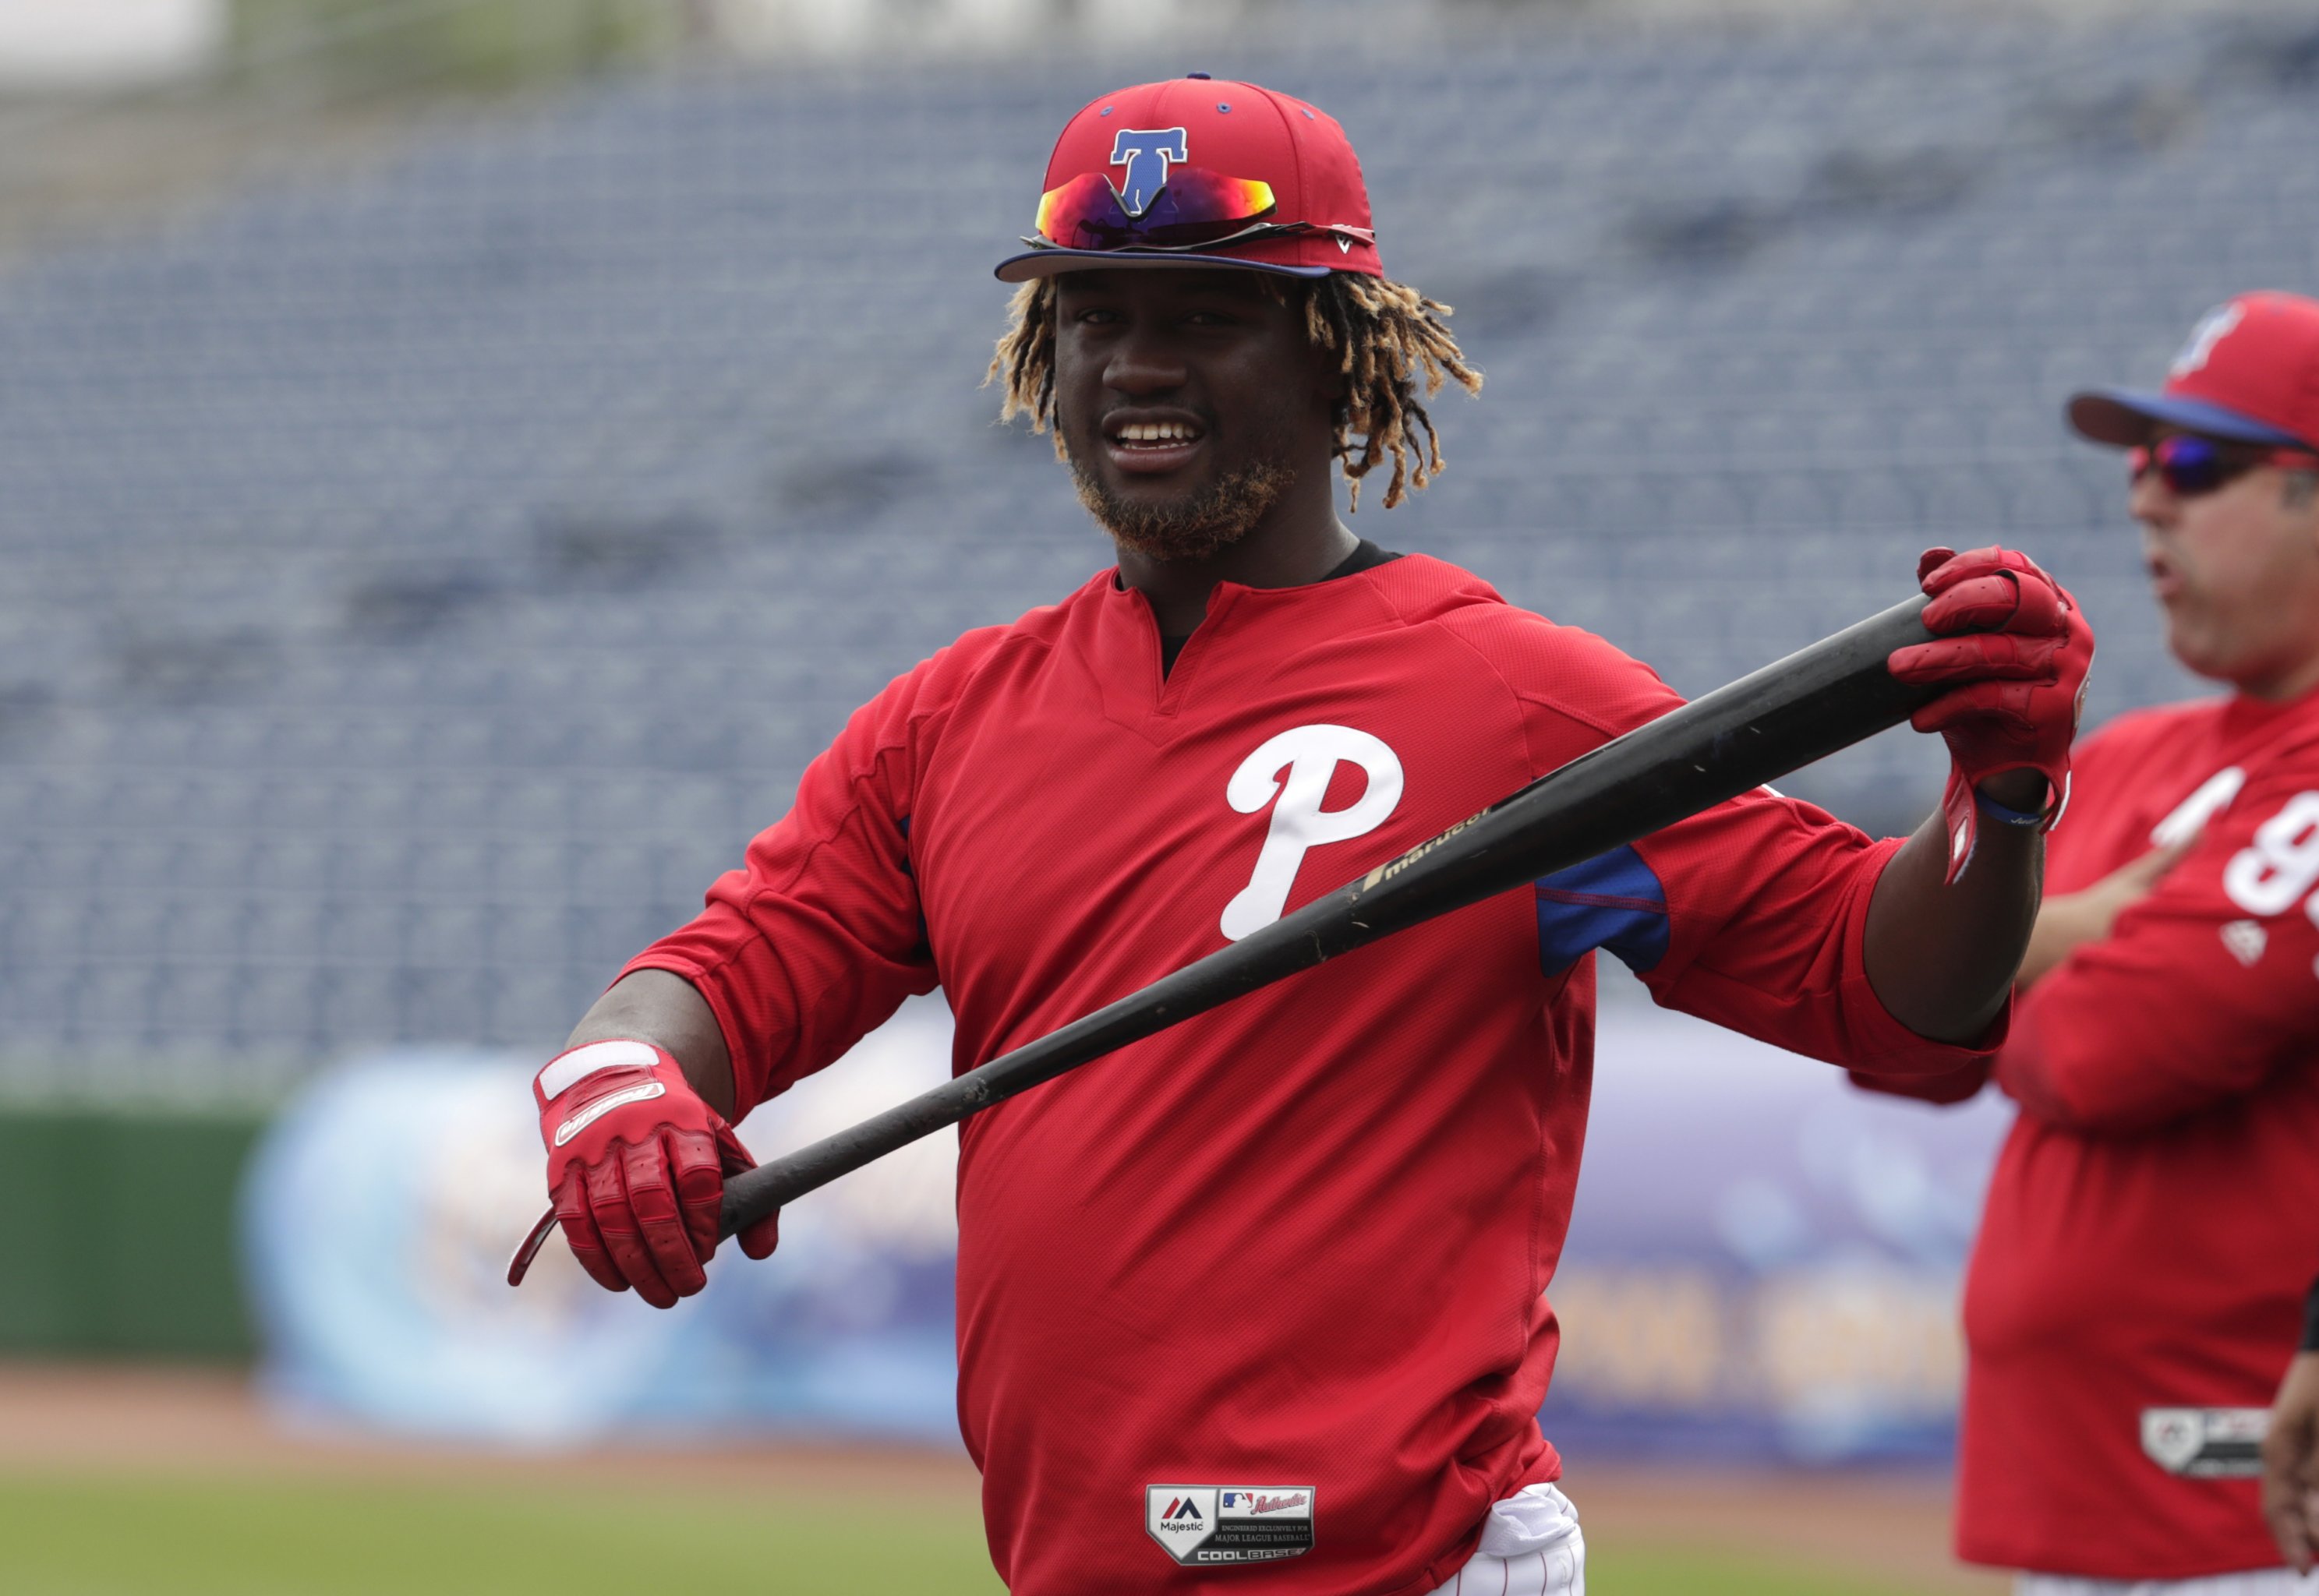 Philadelphia Phillies - Brandon Marsh looking excited, while holding the  end of a baseball bat in his right hand. He is wearing batting gloves, a  long sleeve red shirt, a red hat